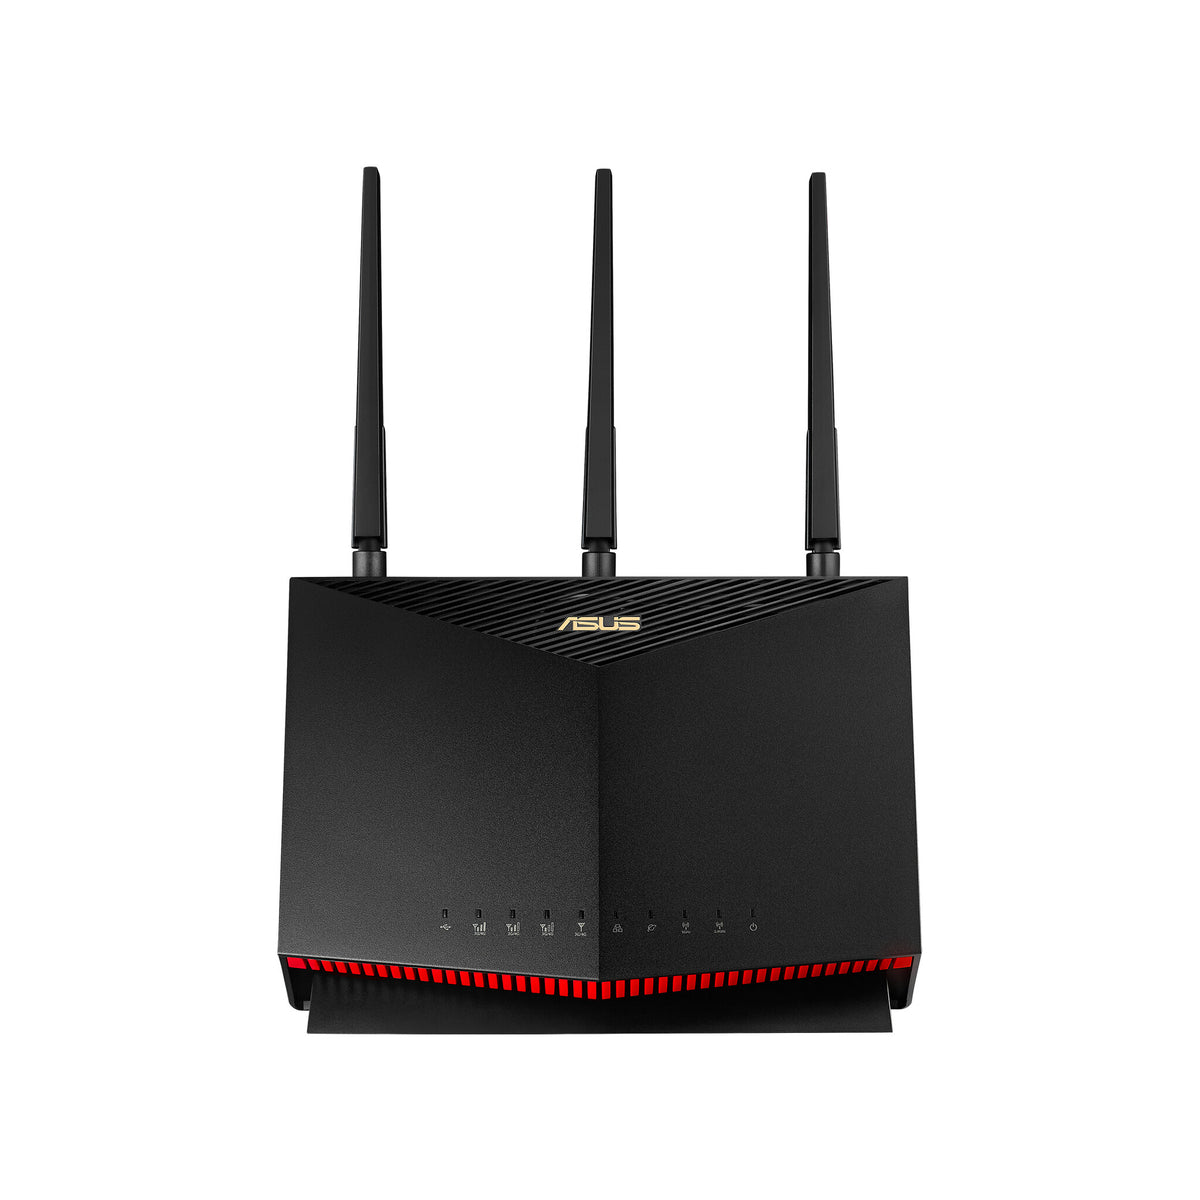 ASUS 4G-AC86U - Gigabit Ethernet Dual-band (2.4 GHz / 5 GHz) wireless router in Black